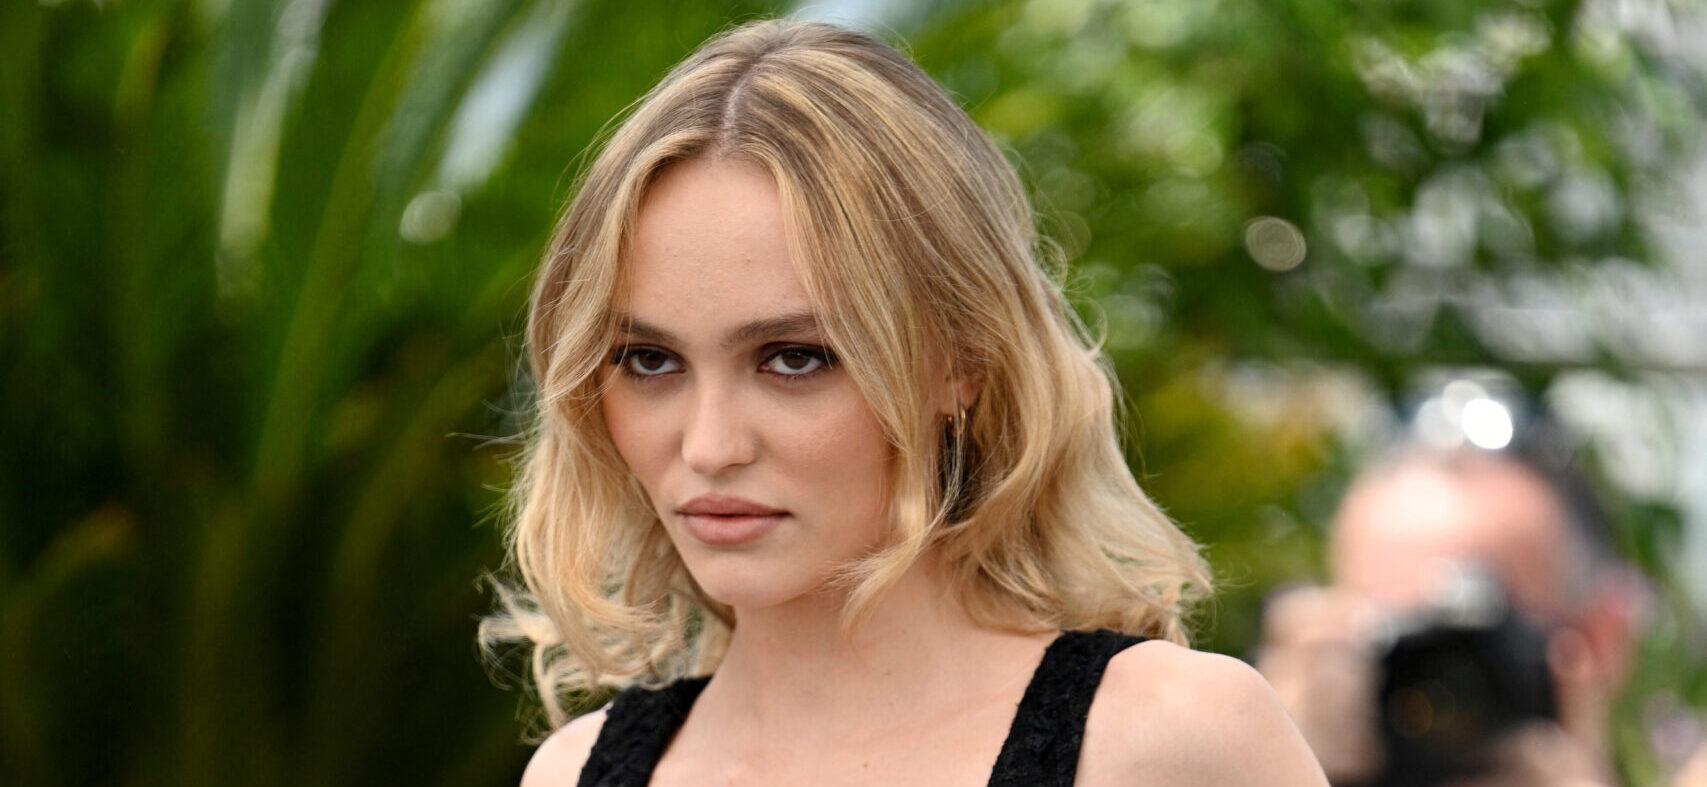 Lily-Rose Depp Faces Backlash In Her Sheer Top And Micro Skirt In Sultry Pics